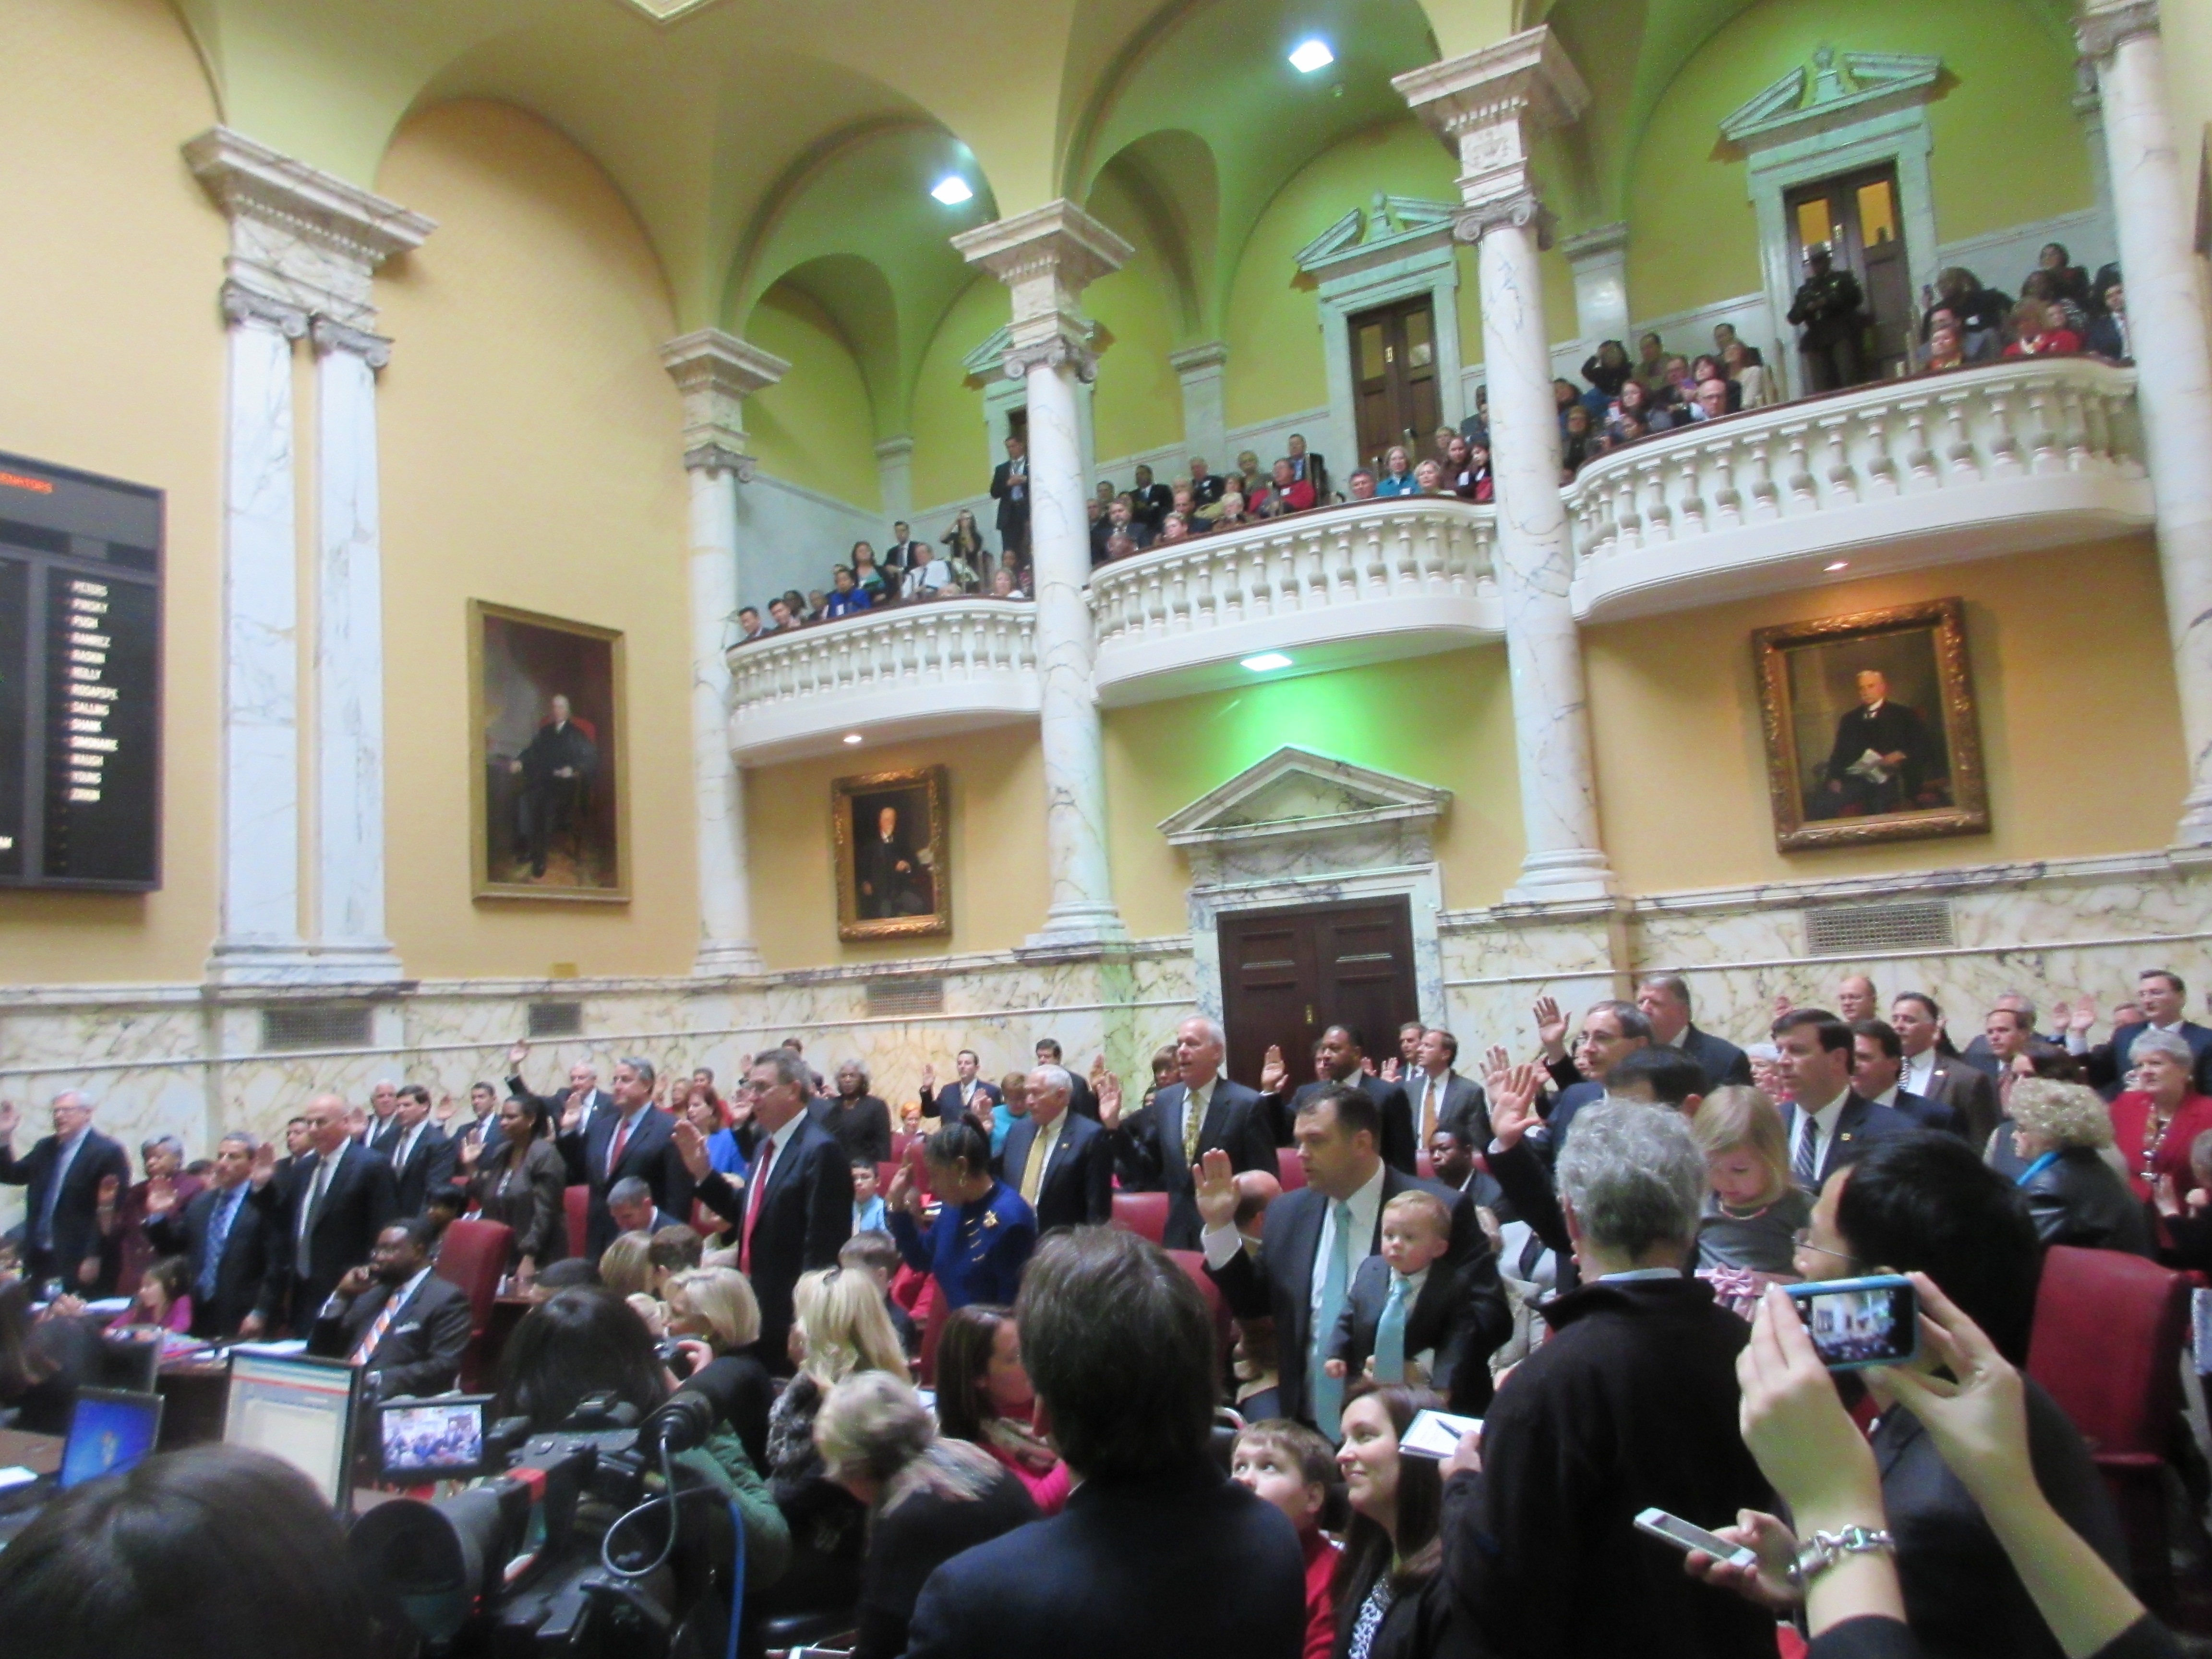 Opening day at Md. State House: Pictures at an exhibition of bipartisanship